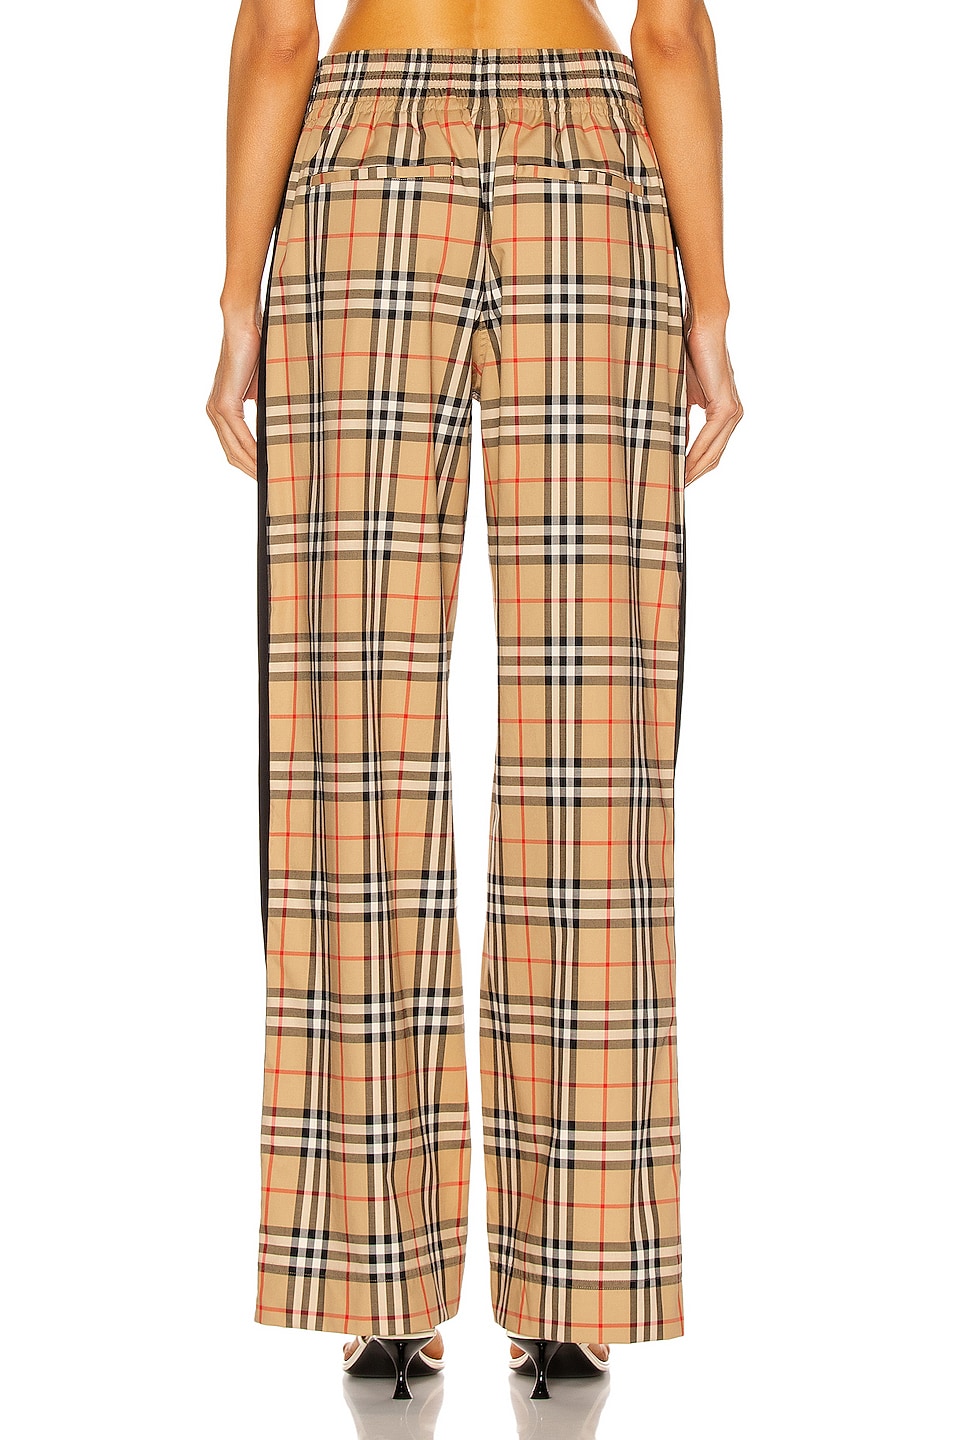 Burberry Louane Pant in Archive Beige IP Check | FWRD